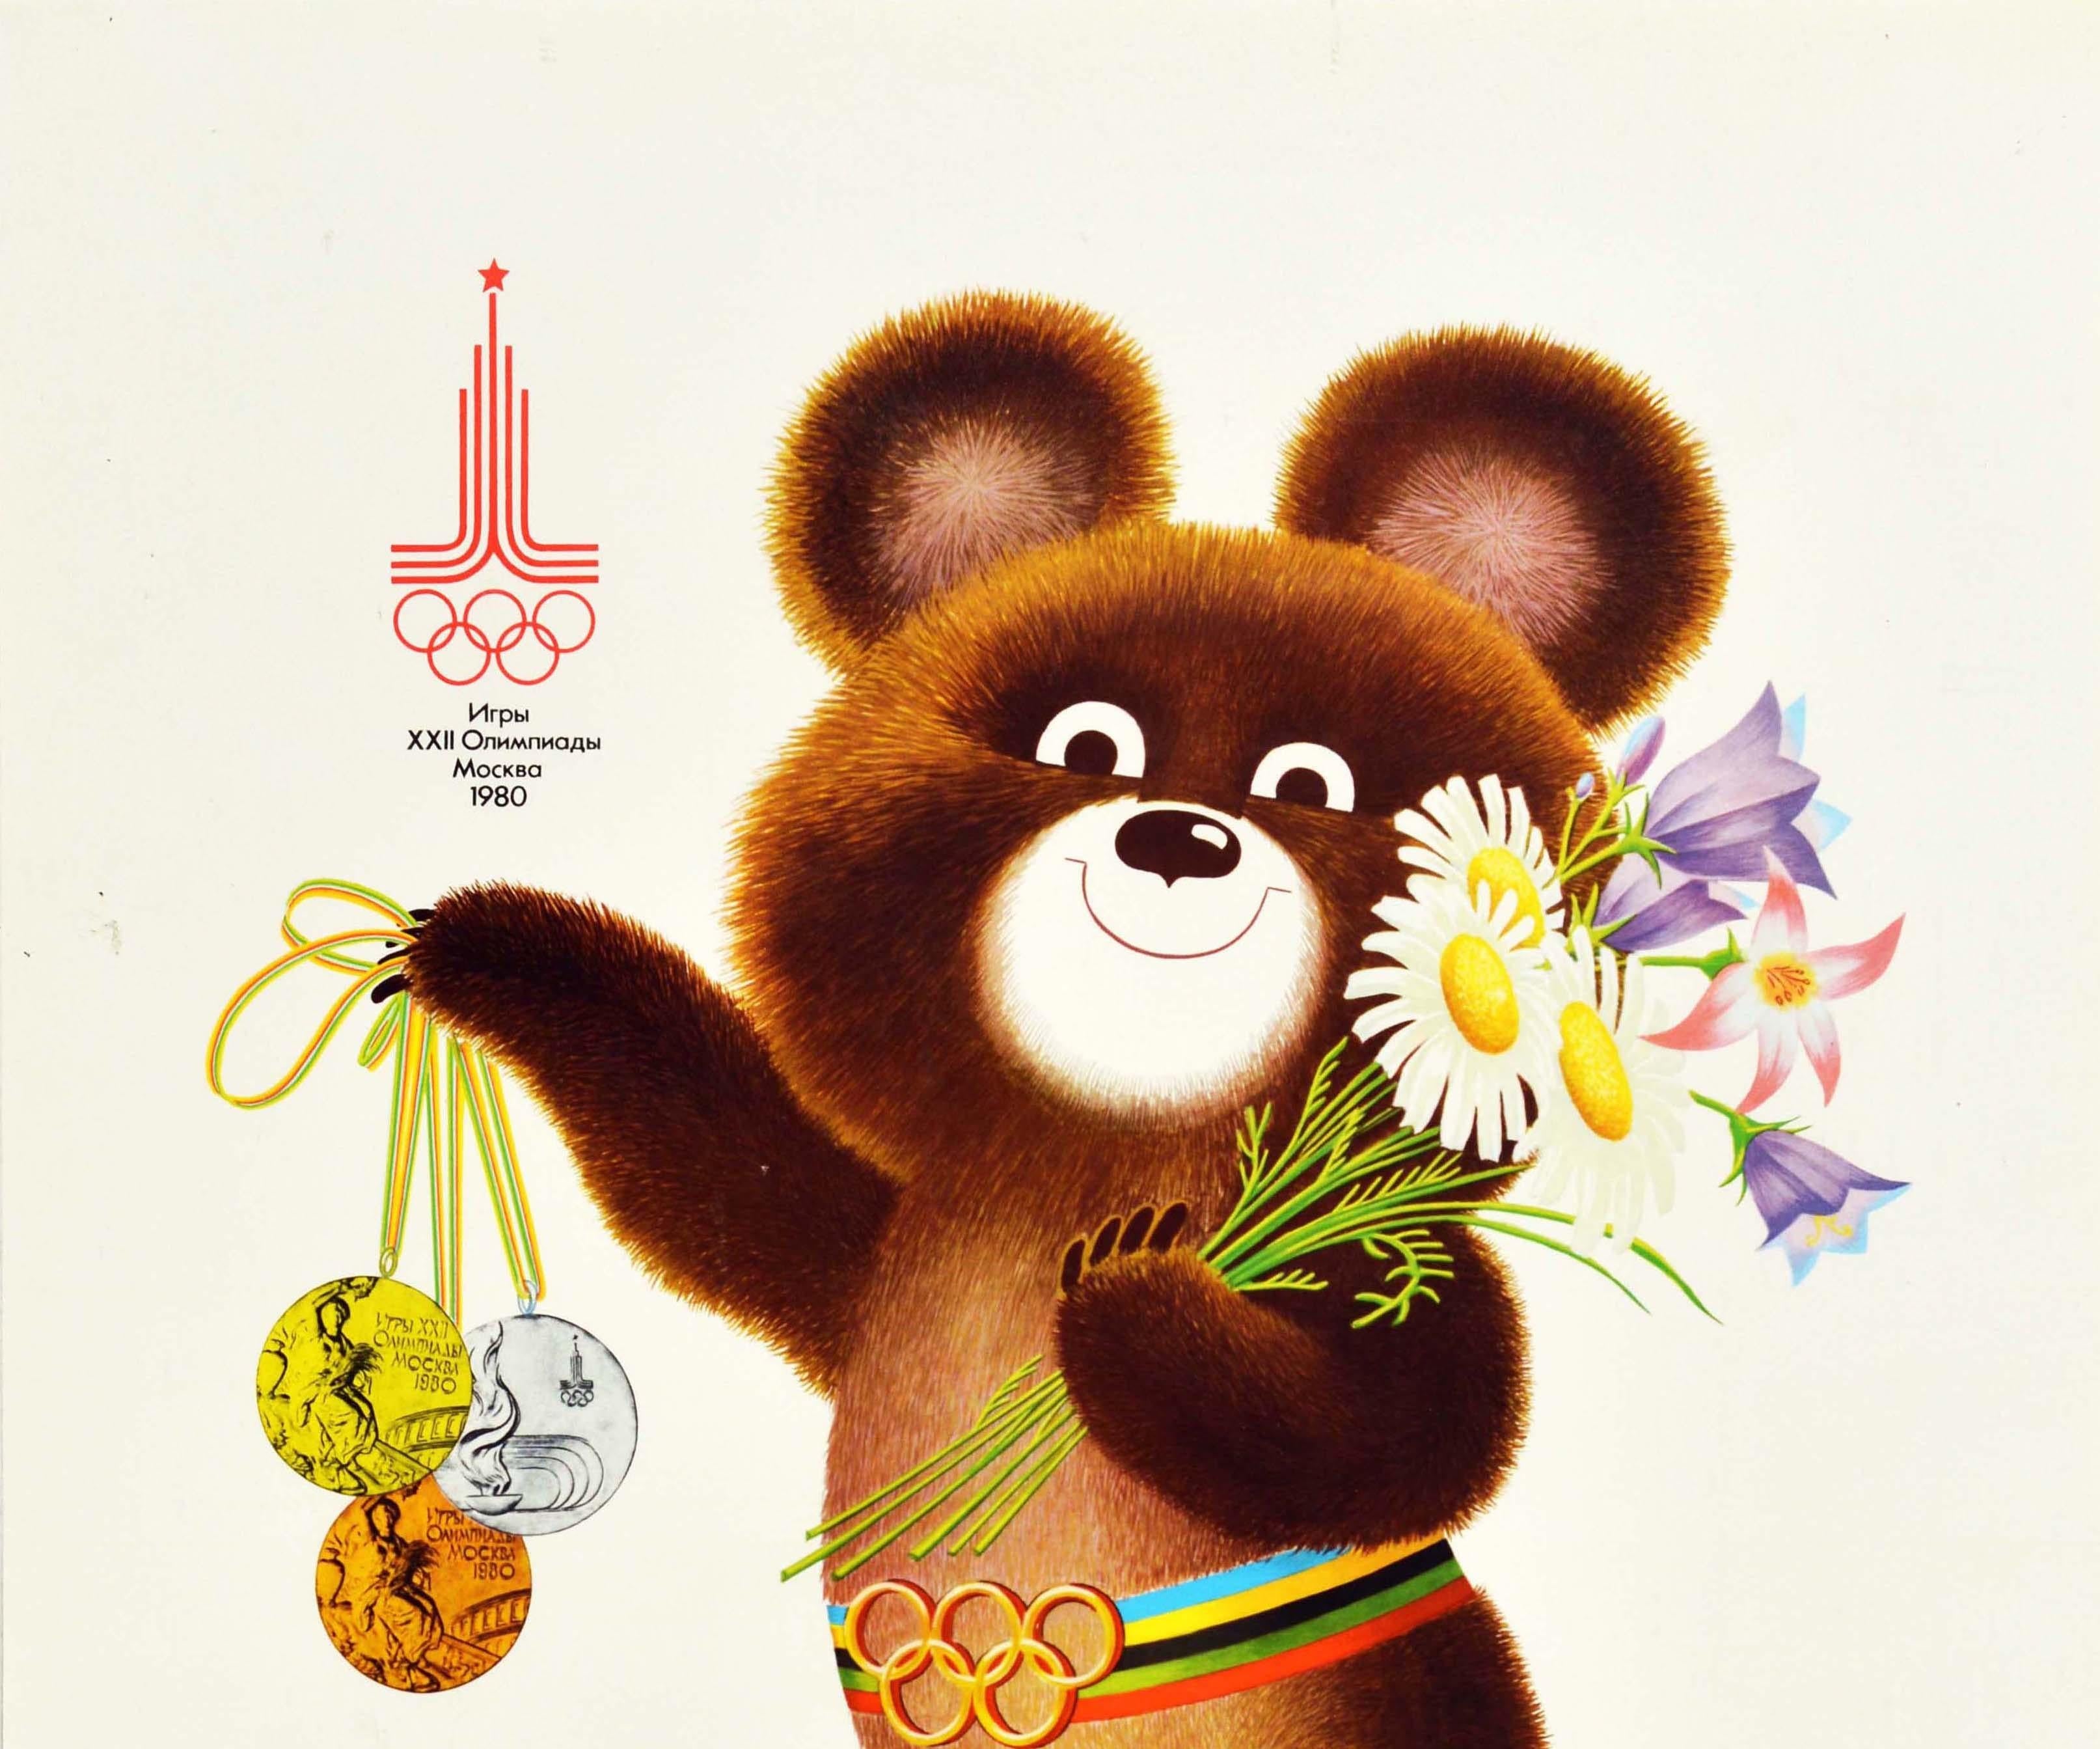 Original vintage Soviet sport poster for the 22nd Summer Olympic Games / Games of the XXII Olympiad in 1980 held in Moscow Russia - ????? ??????! Best Wishes! Bonne Chance! - featuring a fun and colourful illustration depicting a smiling bear -